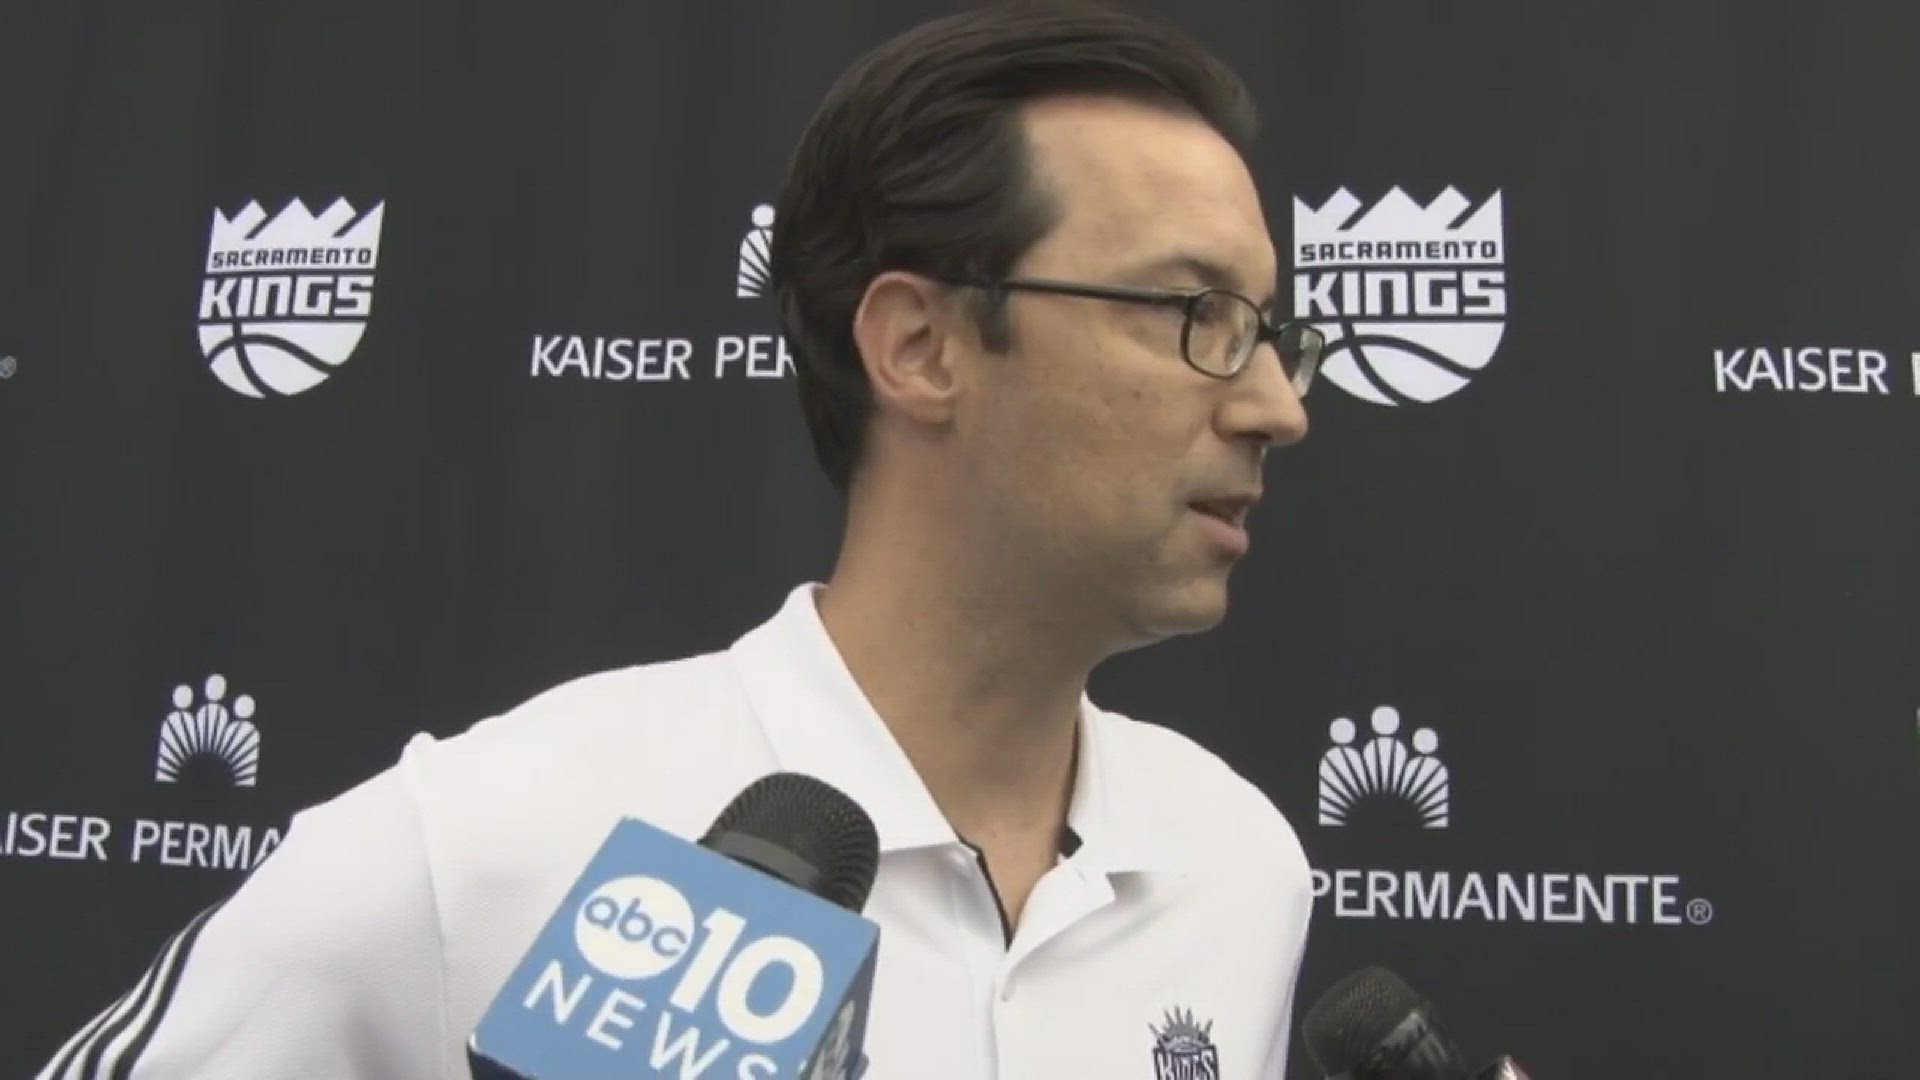 Sacramento Kings assistant general manager Ken Catanella discusses the team's draft approach as the workout process concludes on Monday, and what the team is looking for on Thursday with the 8th and 59th pick of the NBA Draft .